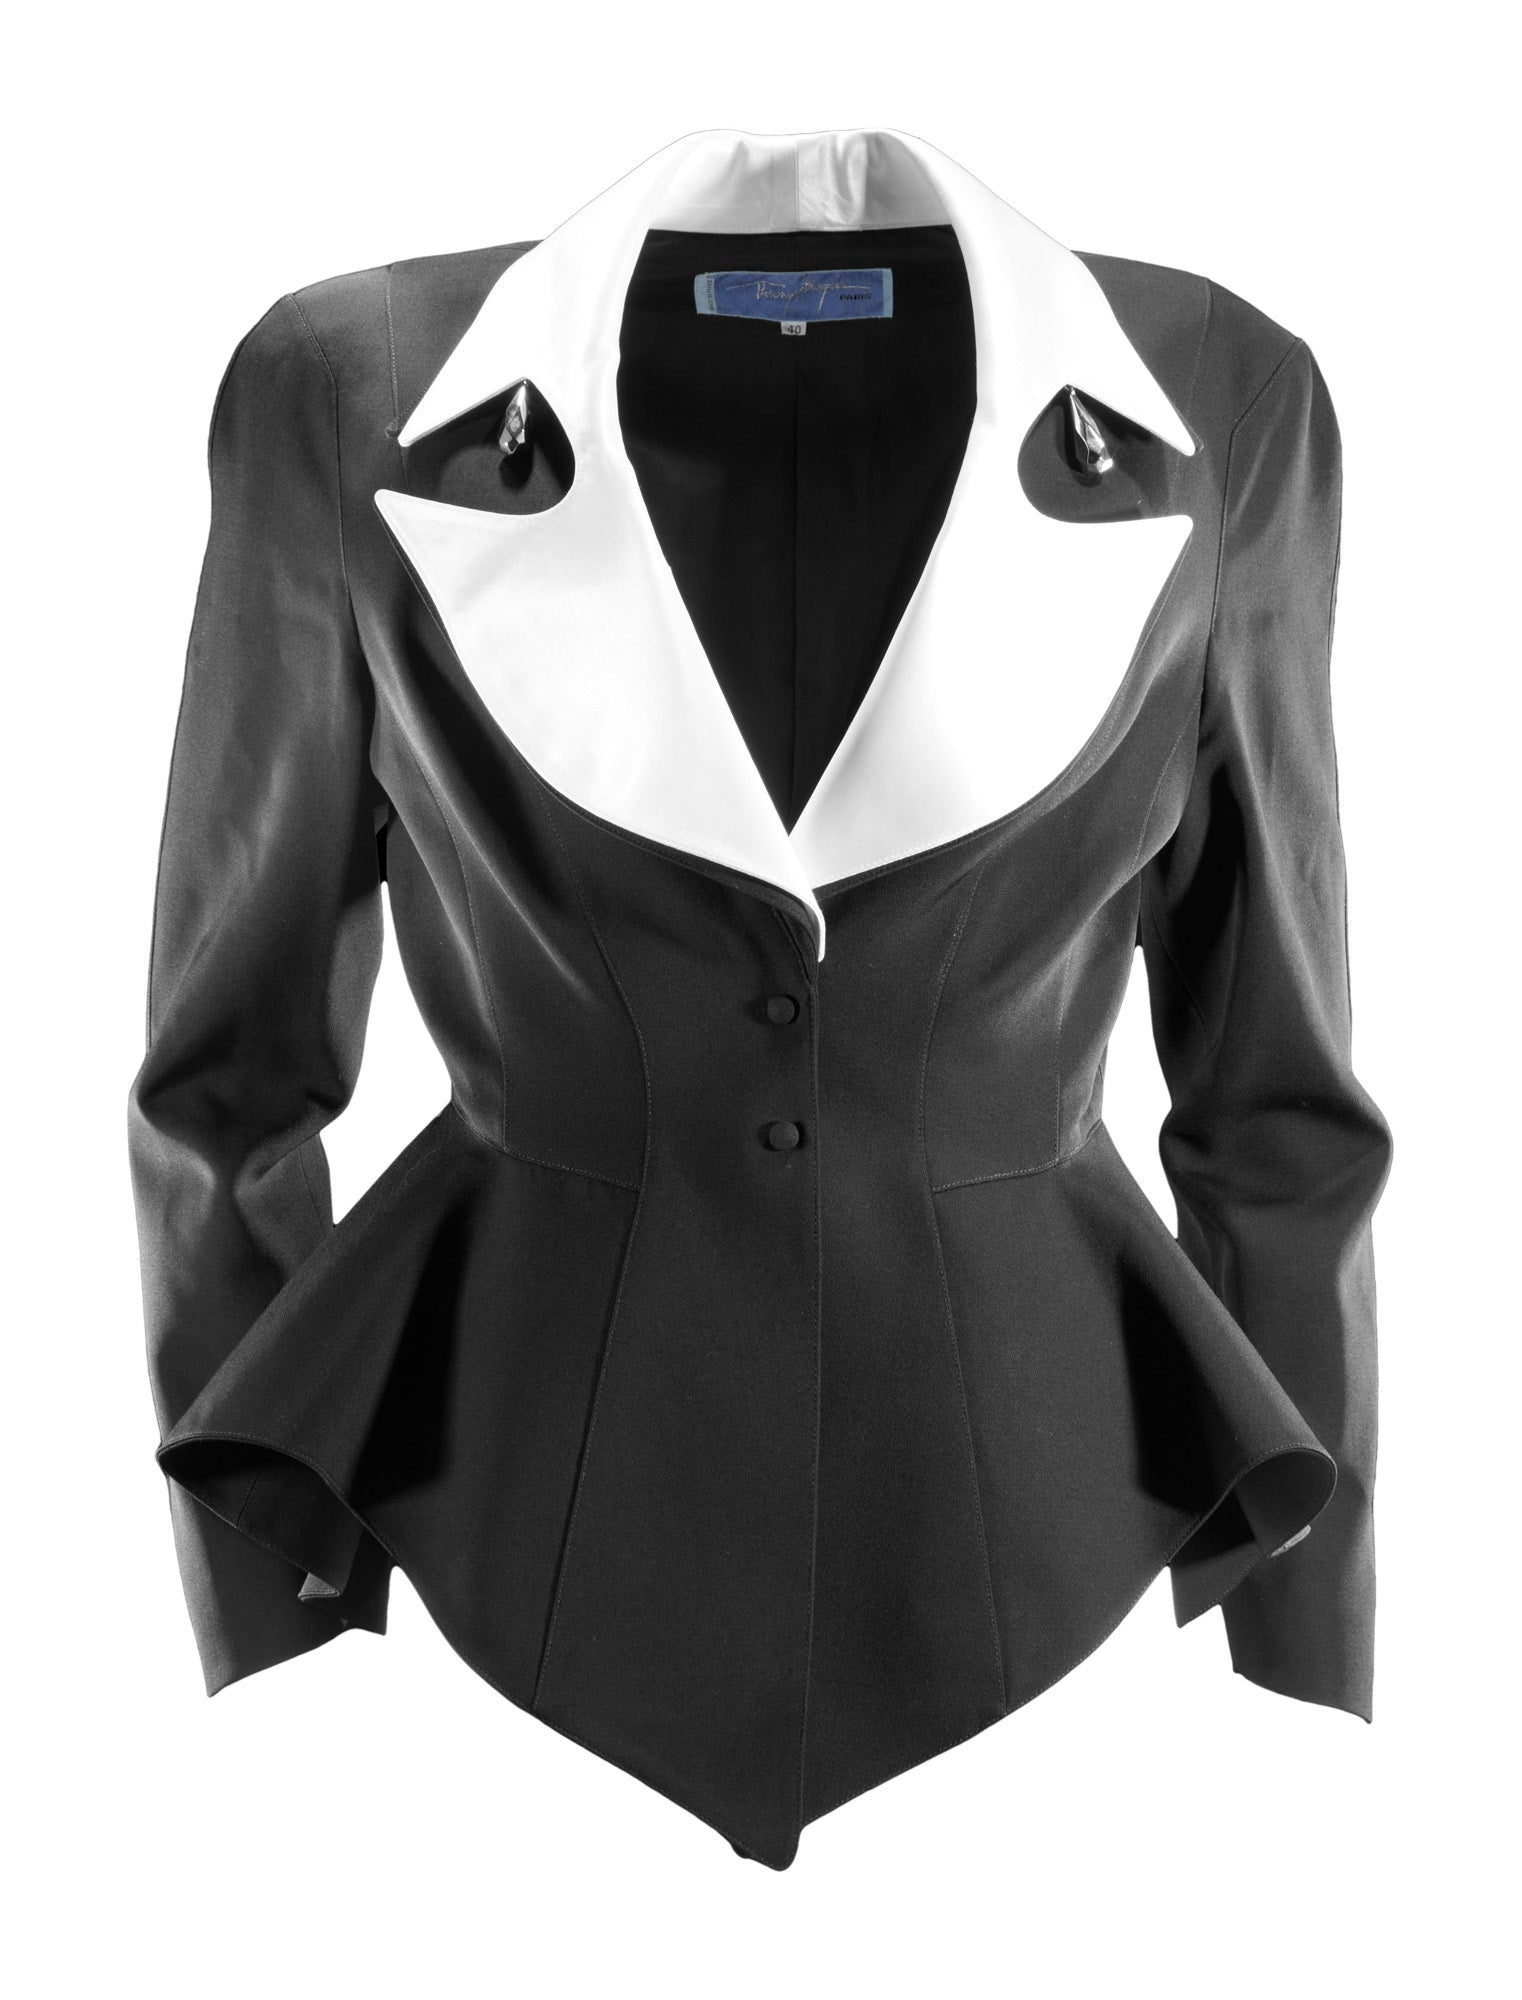  Thierry Mugler F/W 1992 Archival Black Skirt Suit with White Satin Notched Lapels JACKET FRONT 4/10